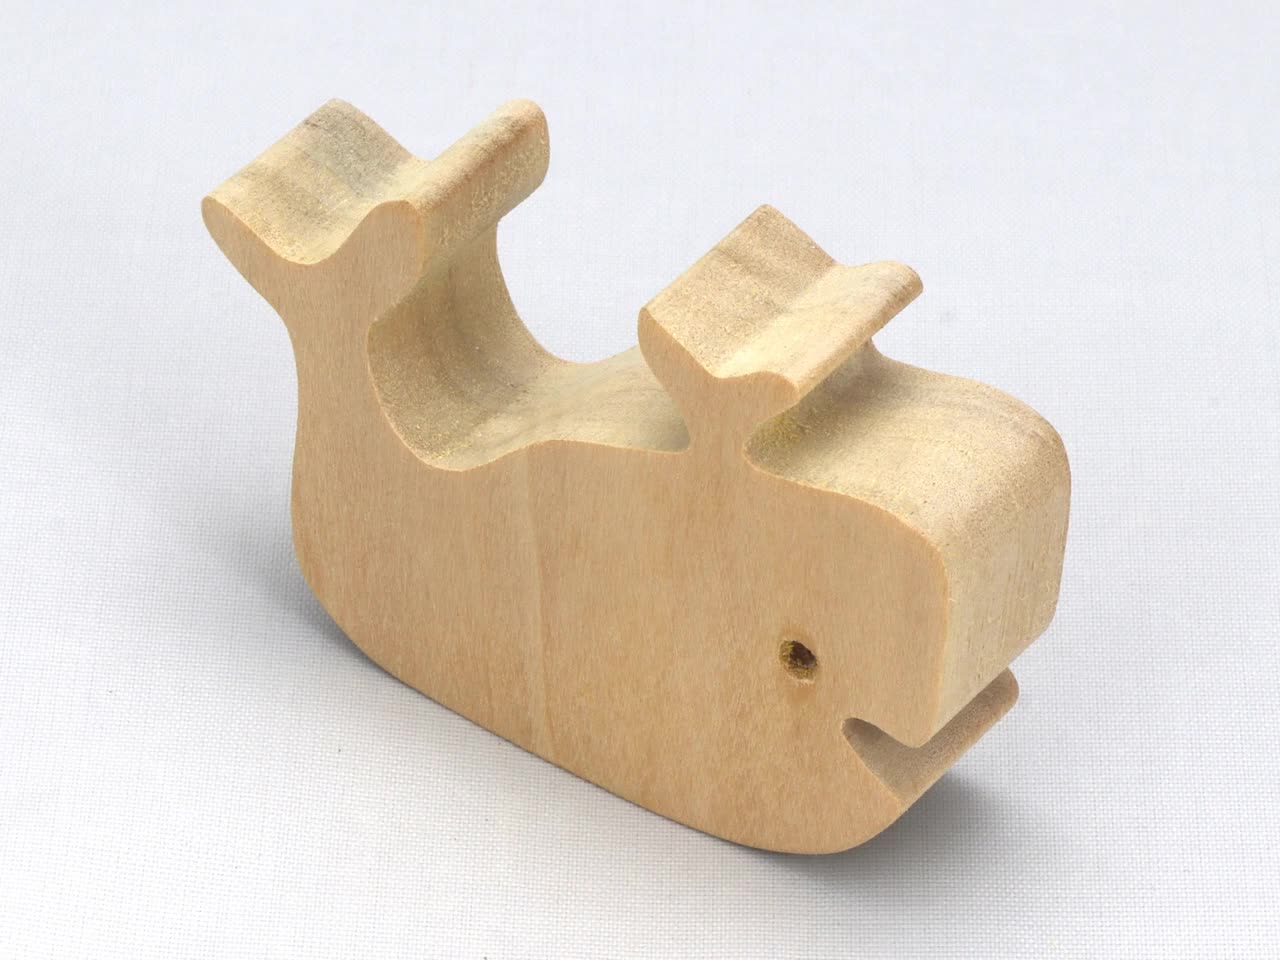 Waldorf Toys Based on a Story, Wooden Animal Toys, Waldorf Wooden Toys 